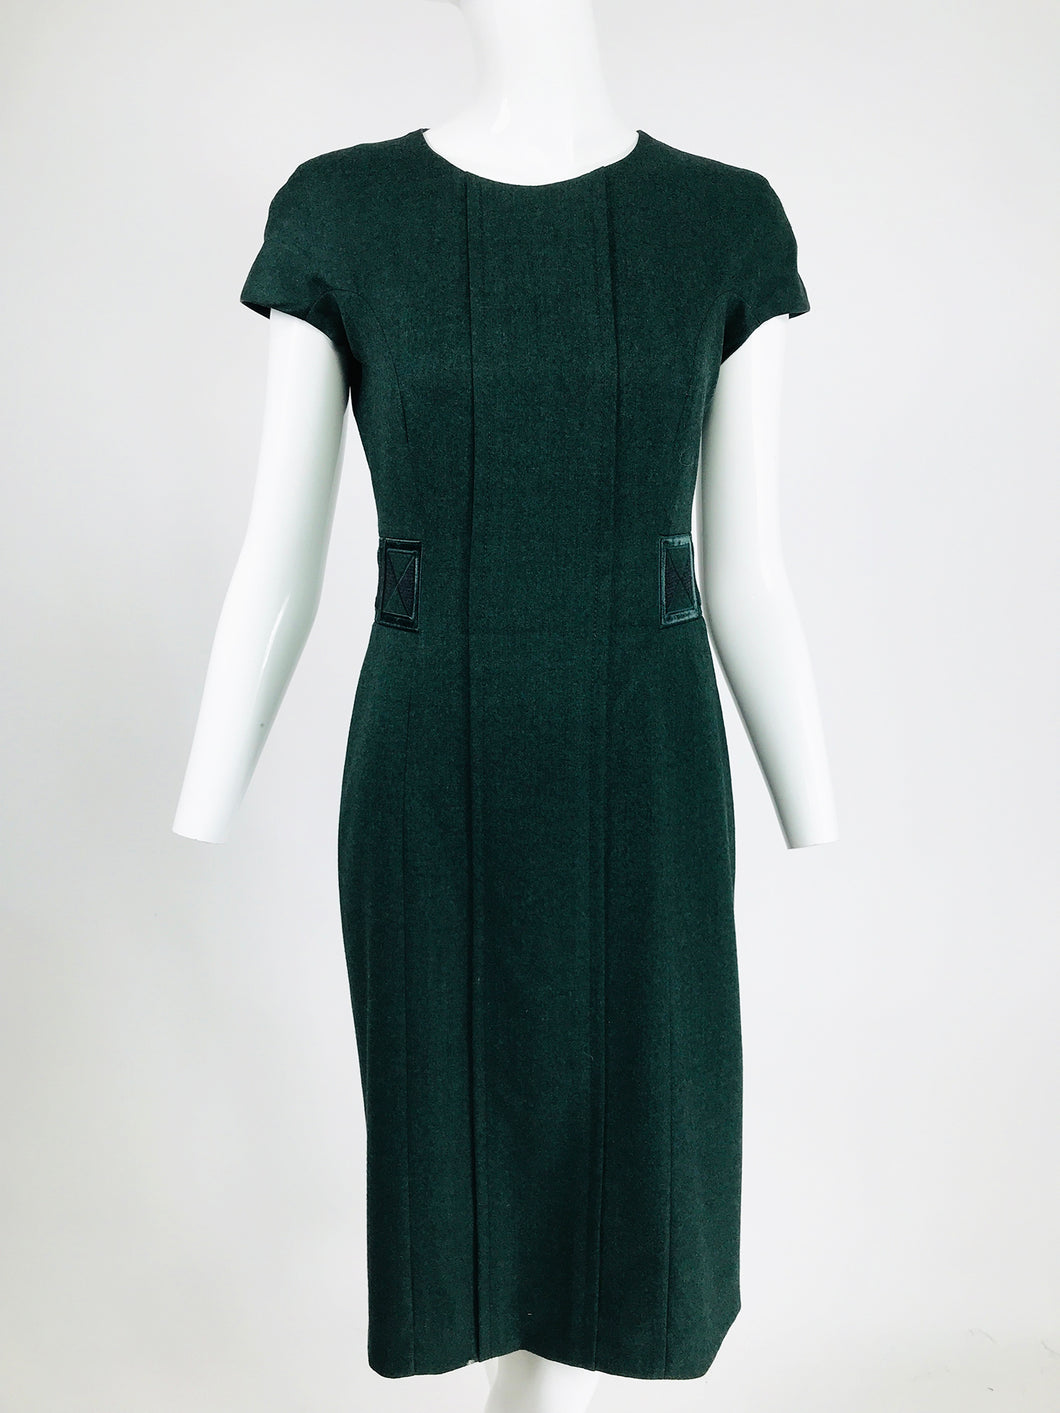 Etro Embroidered Forest Green Cashmere Cap Sleeve Sheath Dress